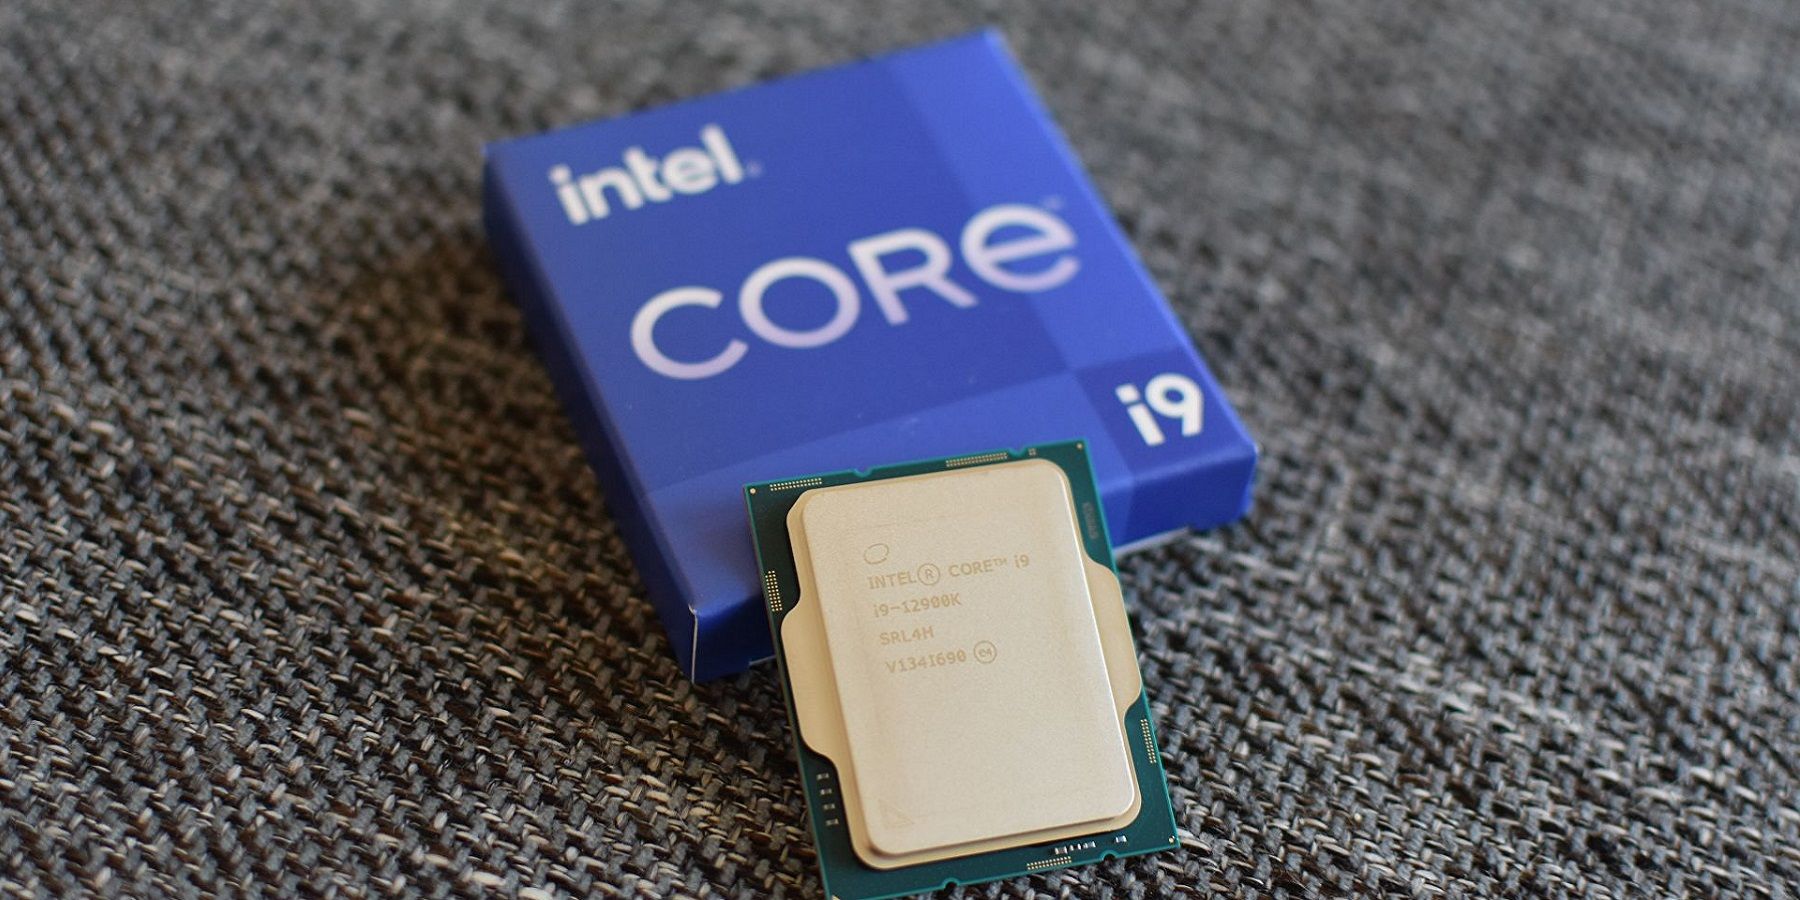 A photo of the Intel i9-12900k processor leaning againts its display box.